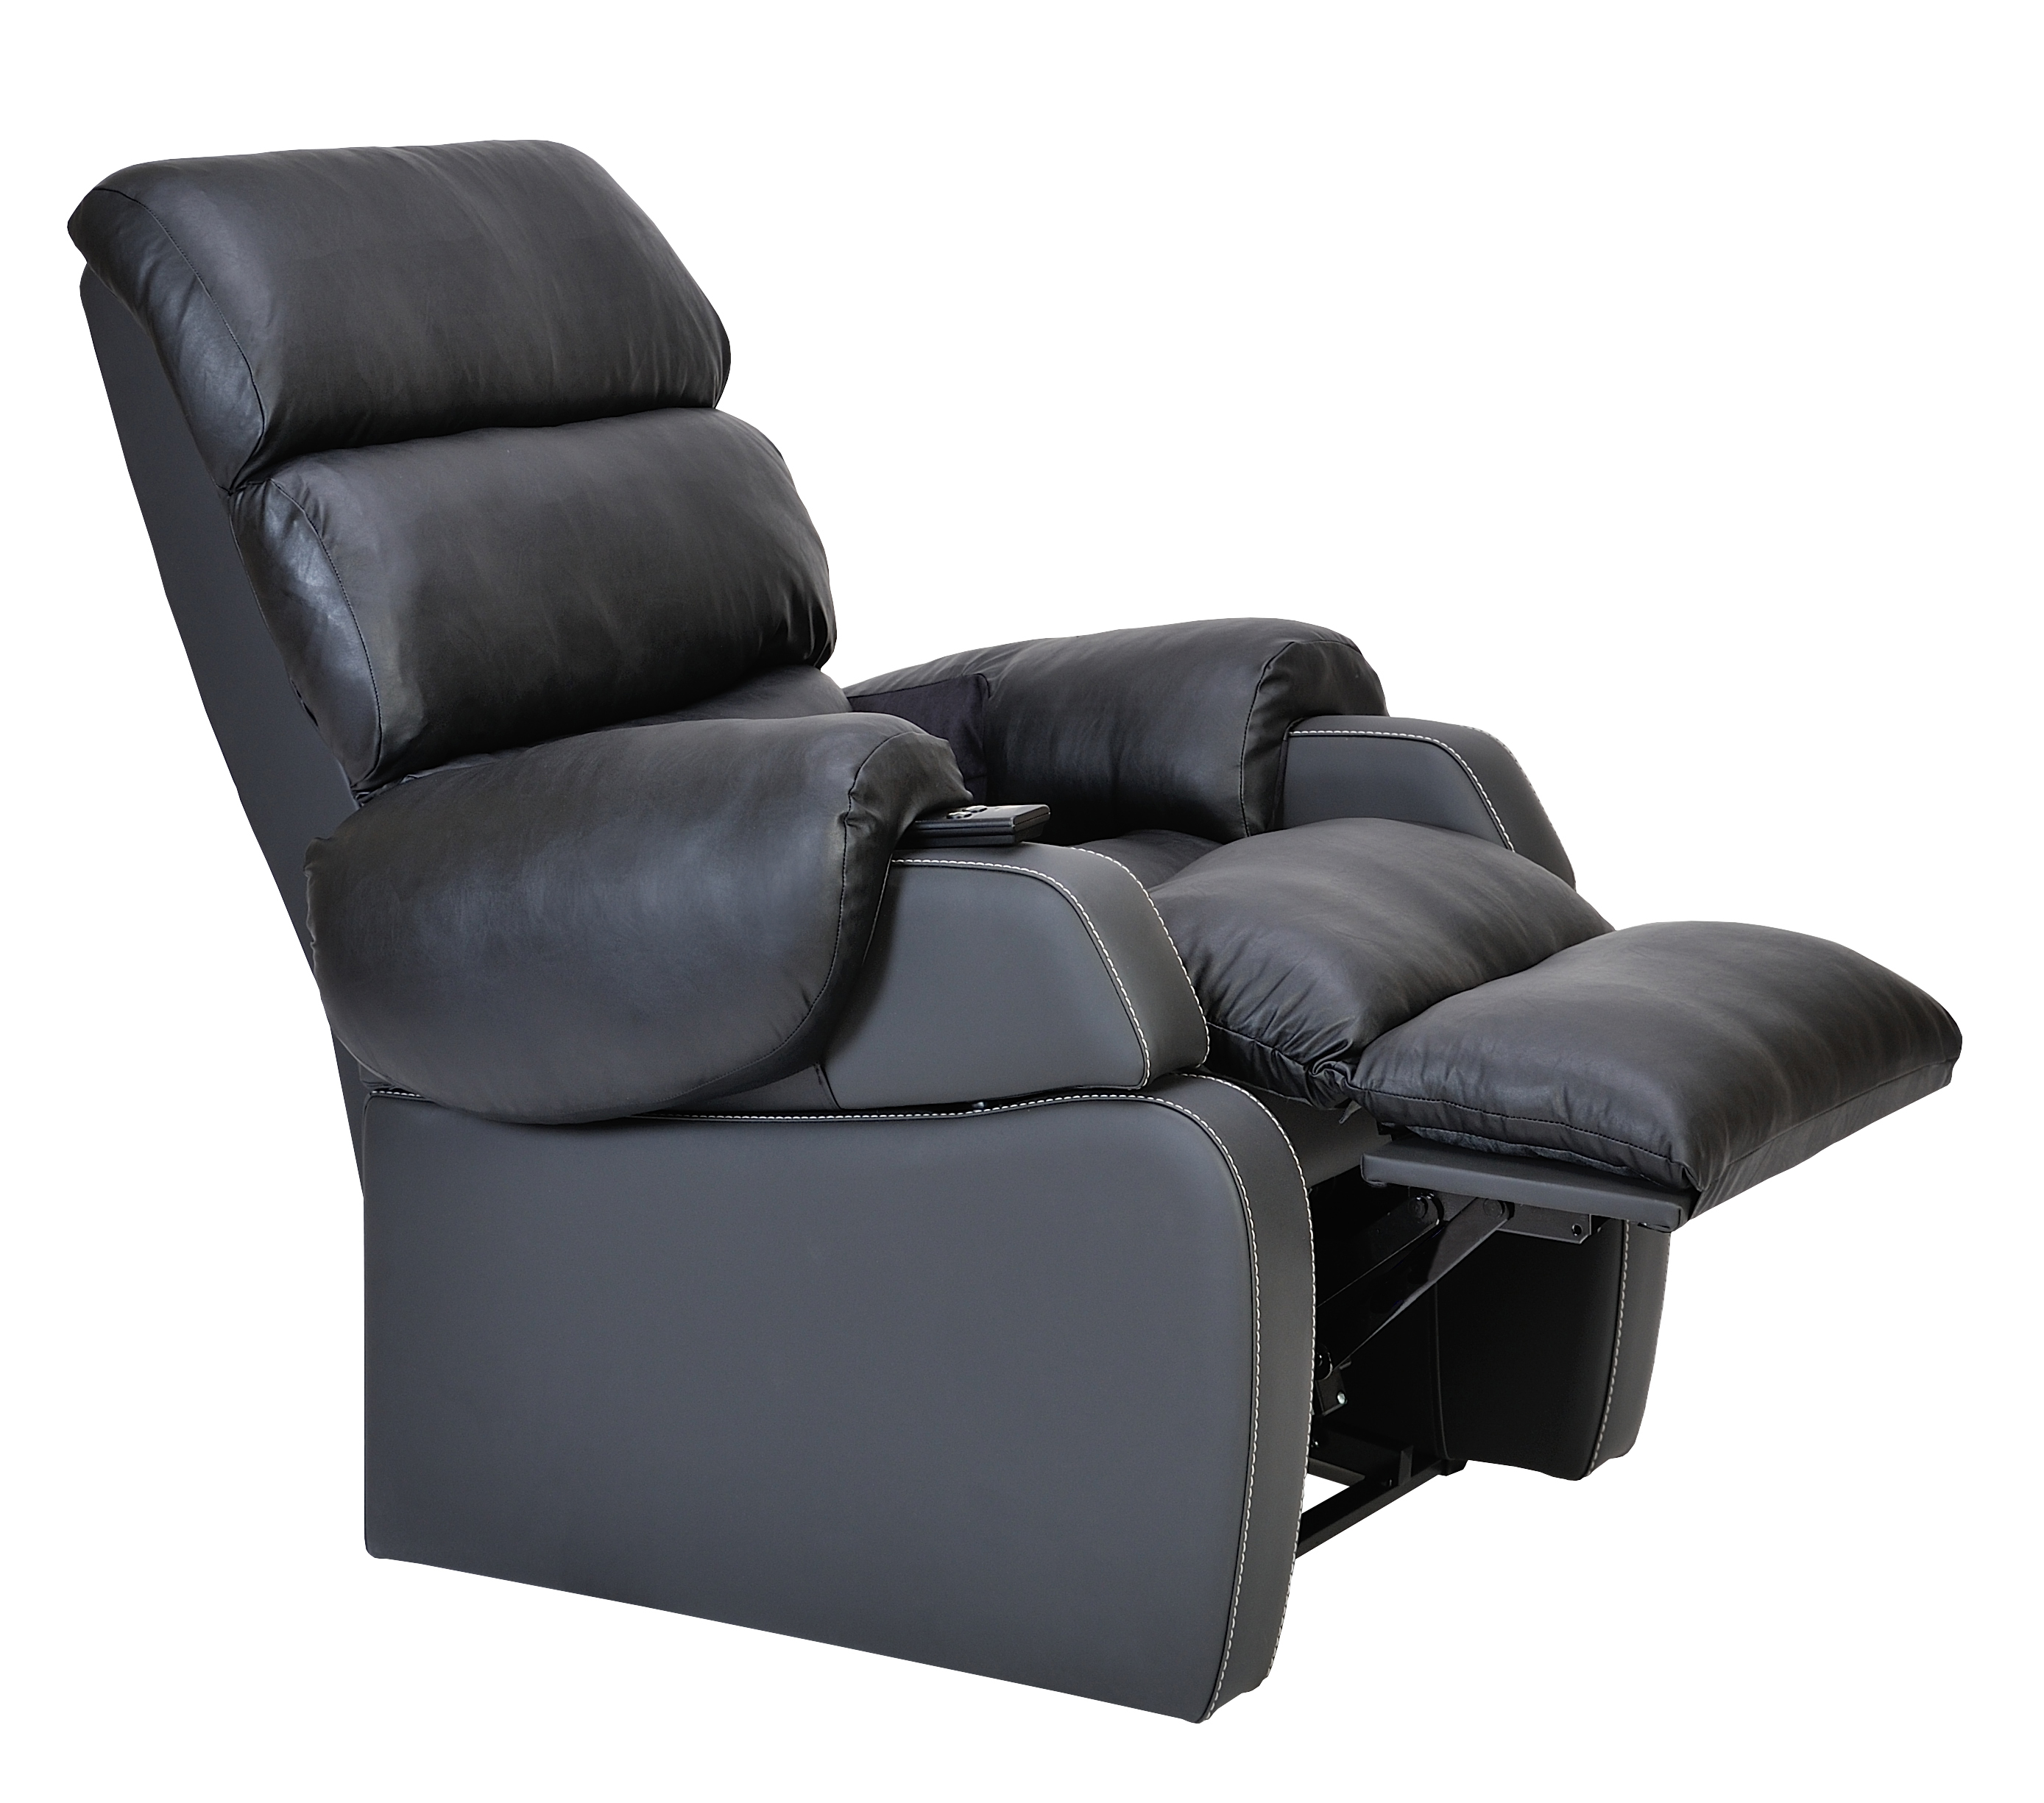 Buy Cocoon Lift Recliner Chair Dual Power Generation 1, Medical